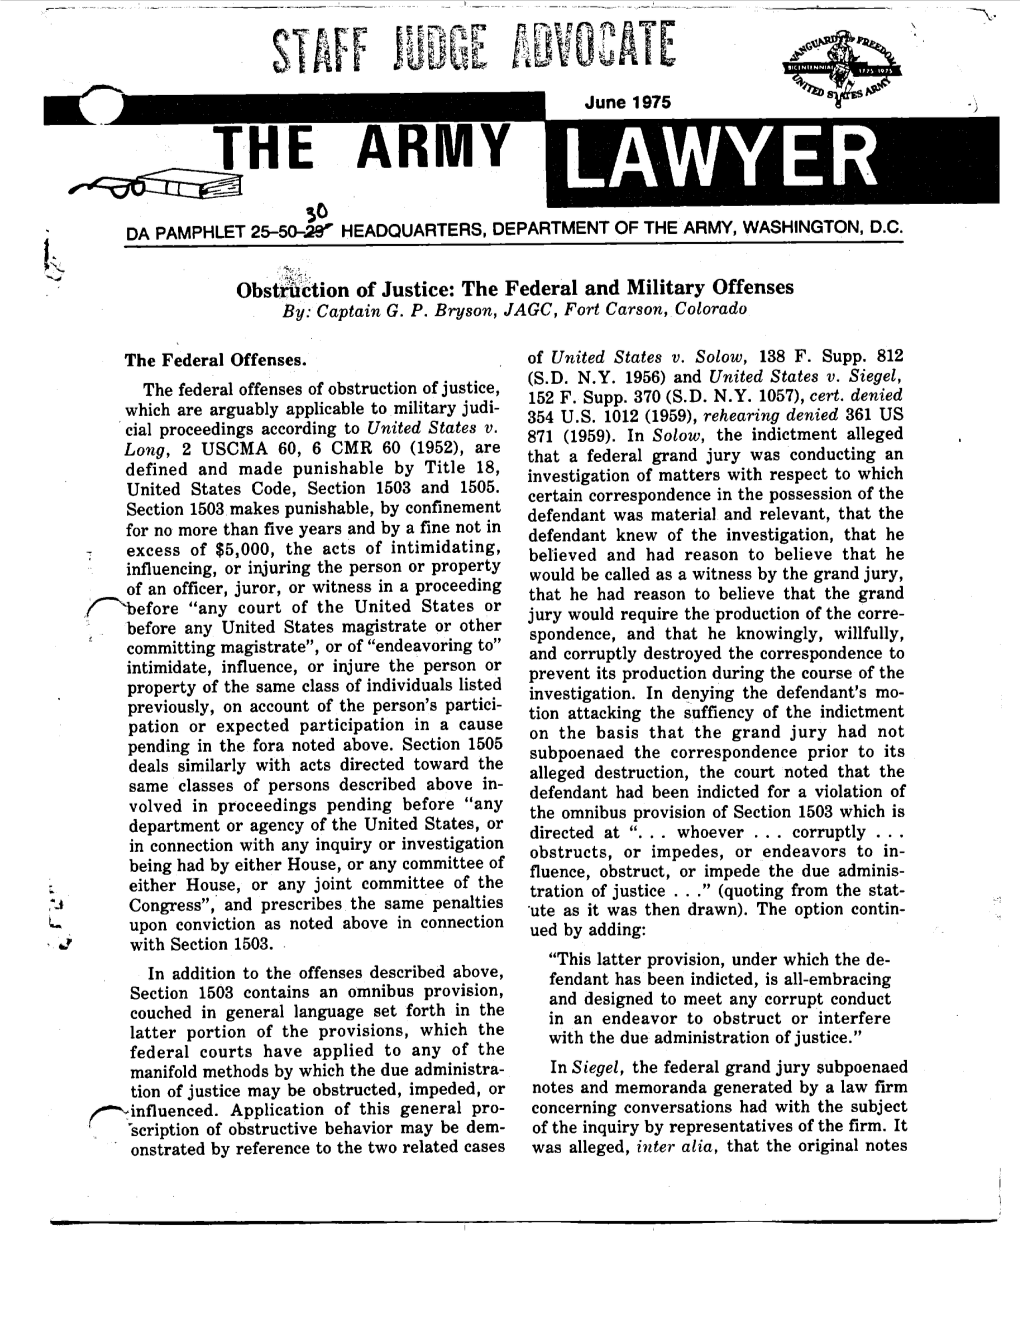 The Army Lawyer Is Published Monthly by the Judge Be Comprehended by the Expression “Depart- C Advocate General’S School